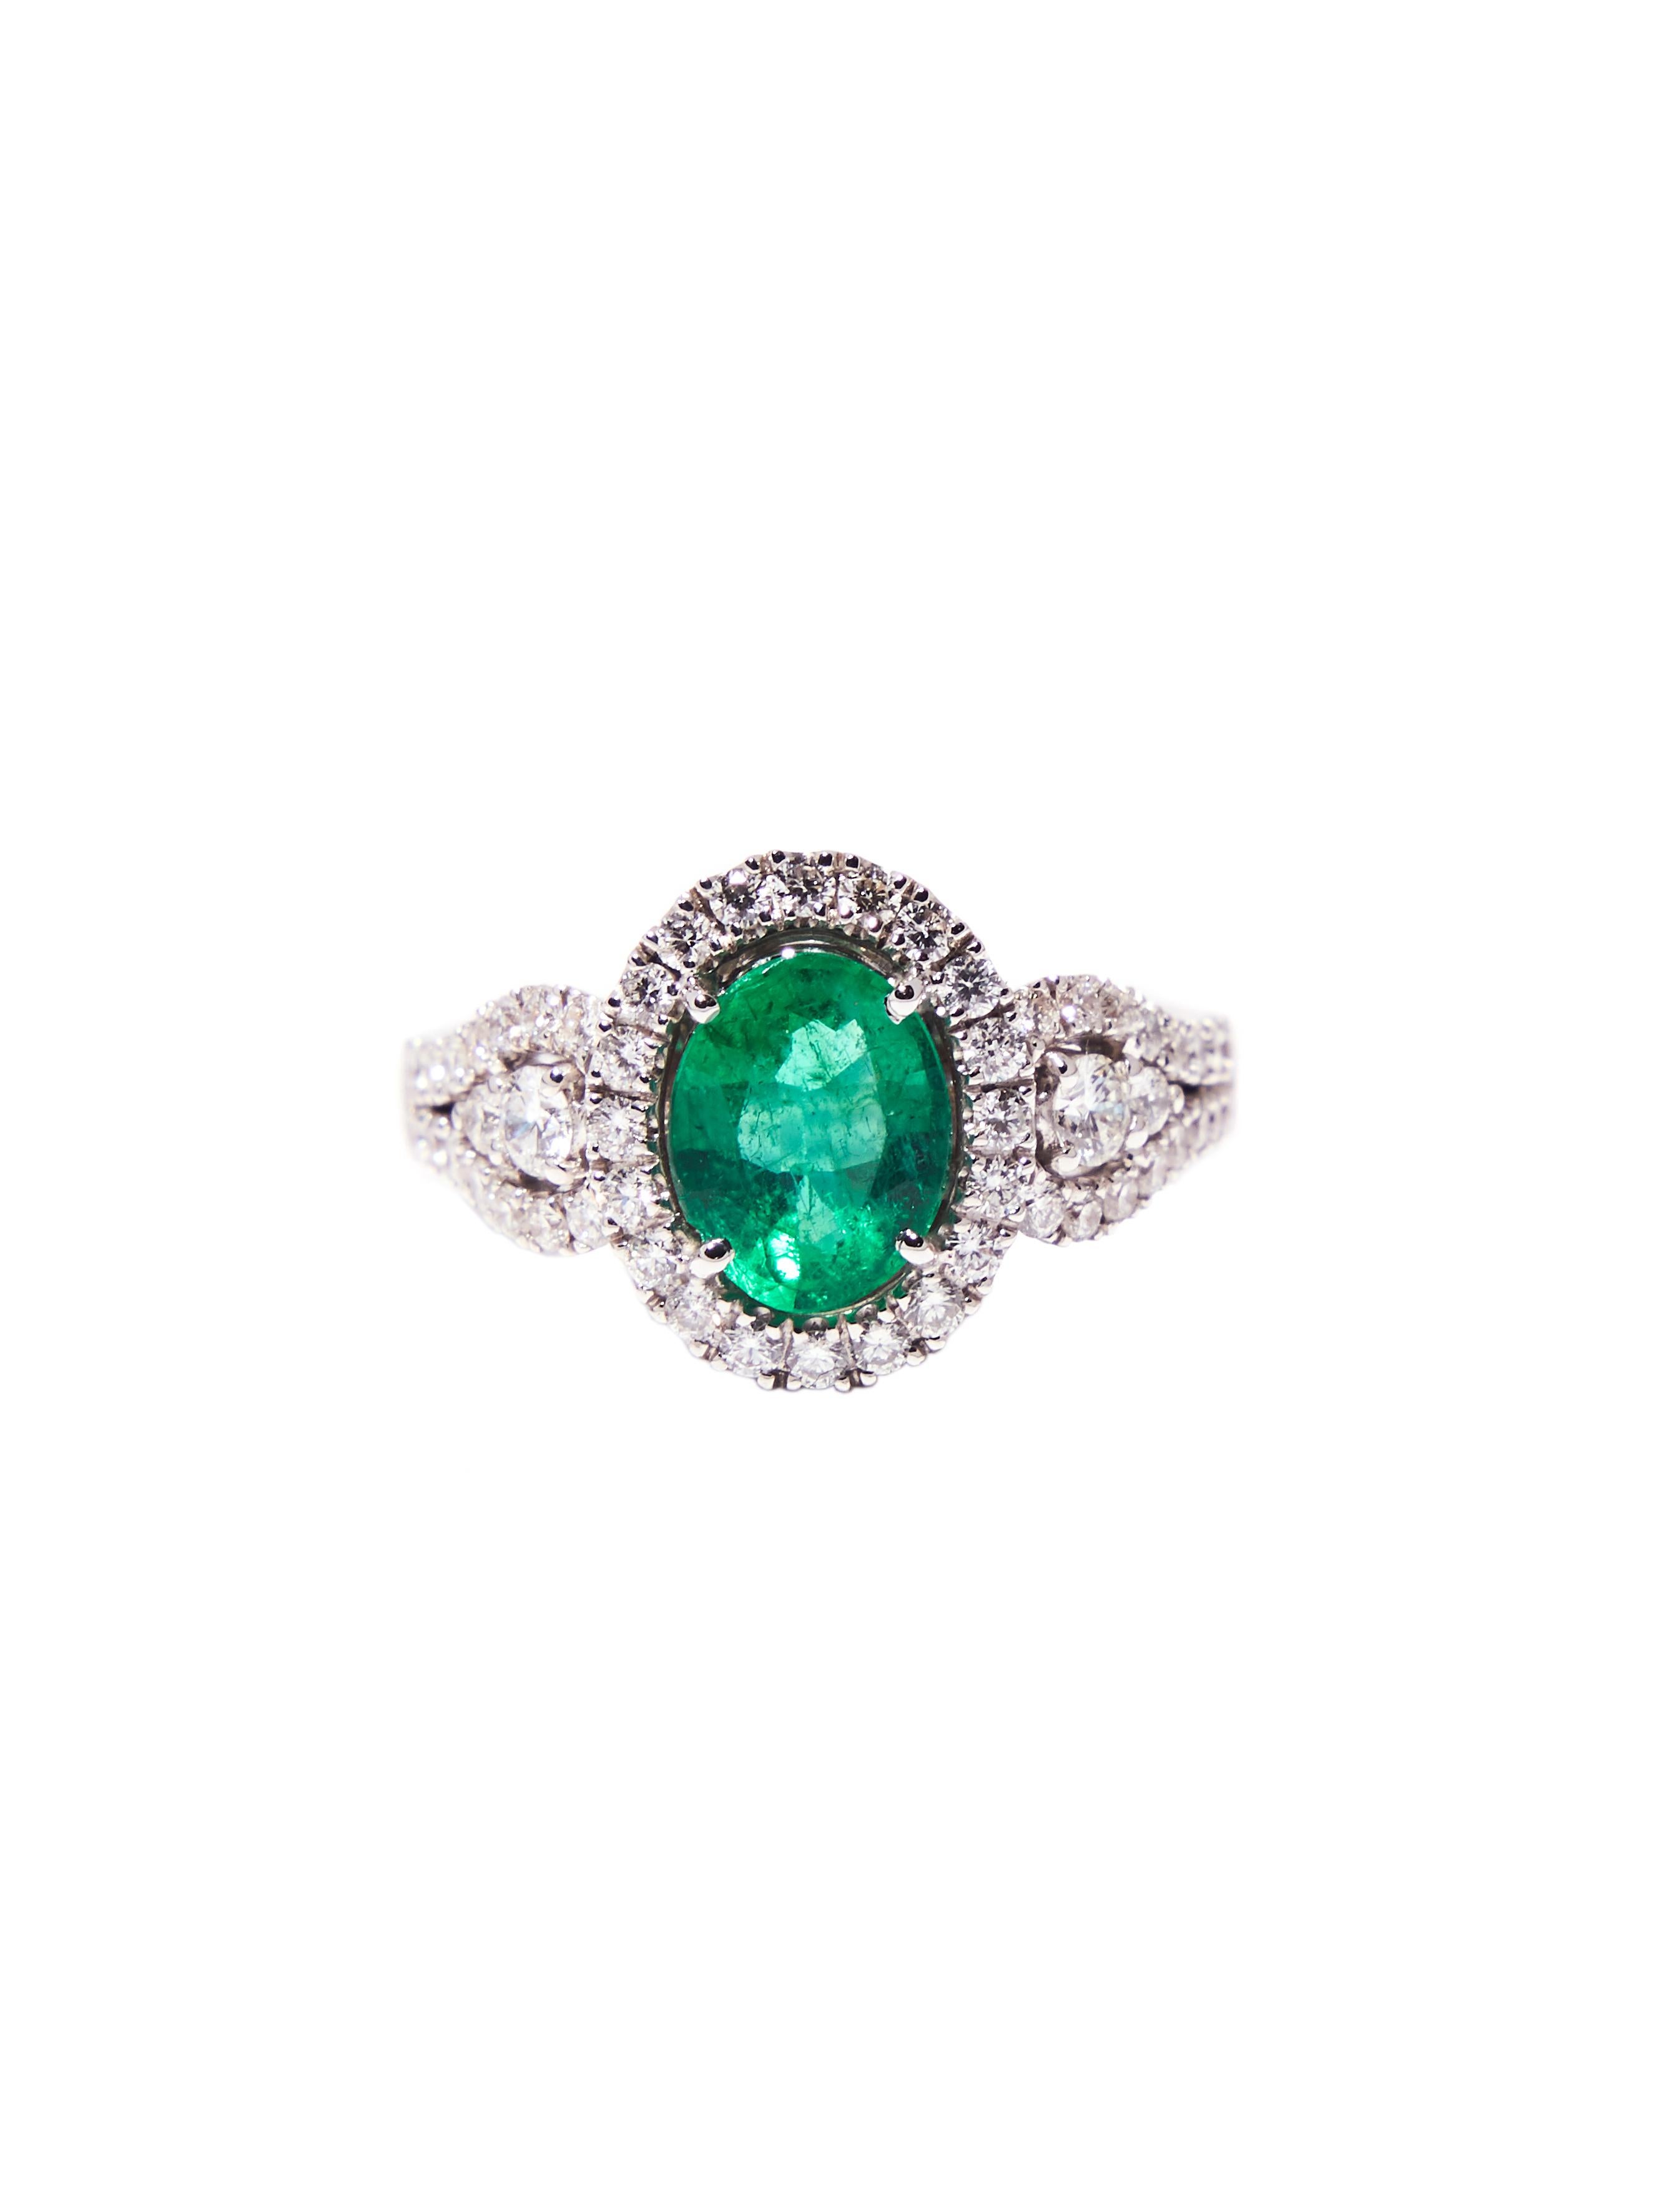 Women's White Gold Engagement Ring with 1.50 Carat Oval Emerald and Diamonds